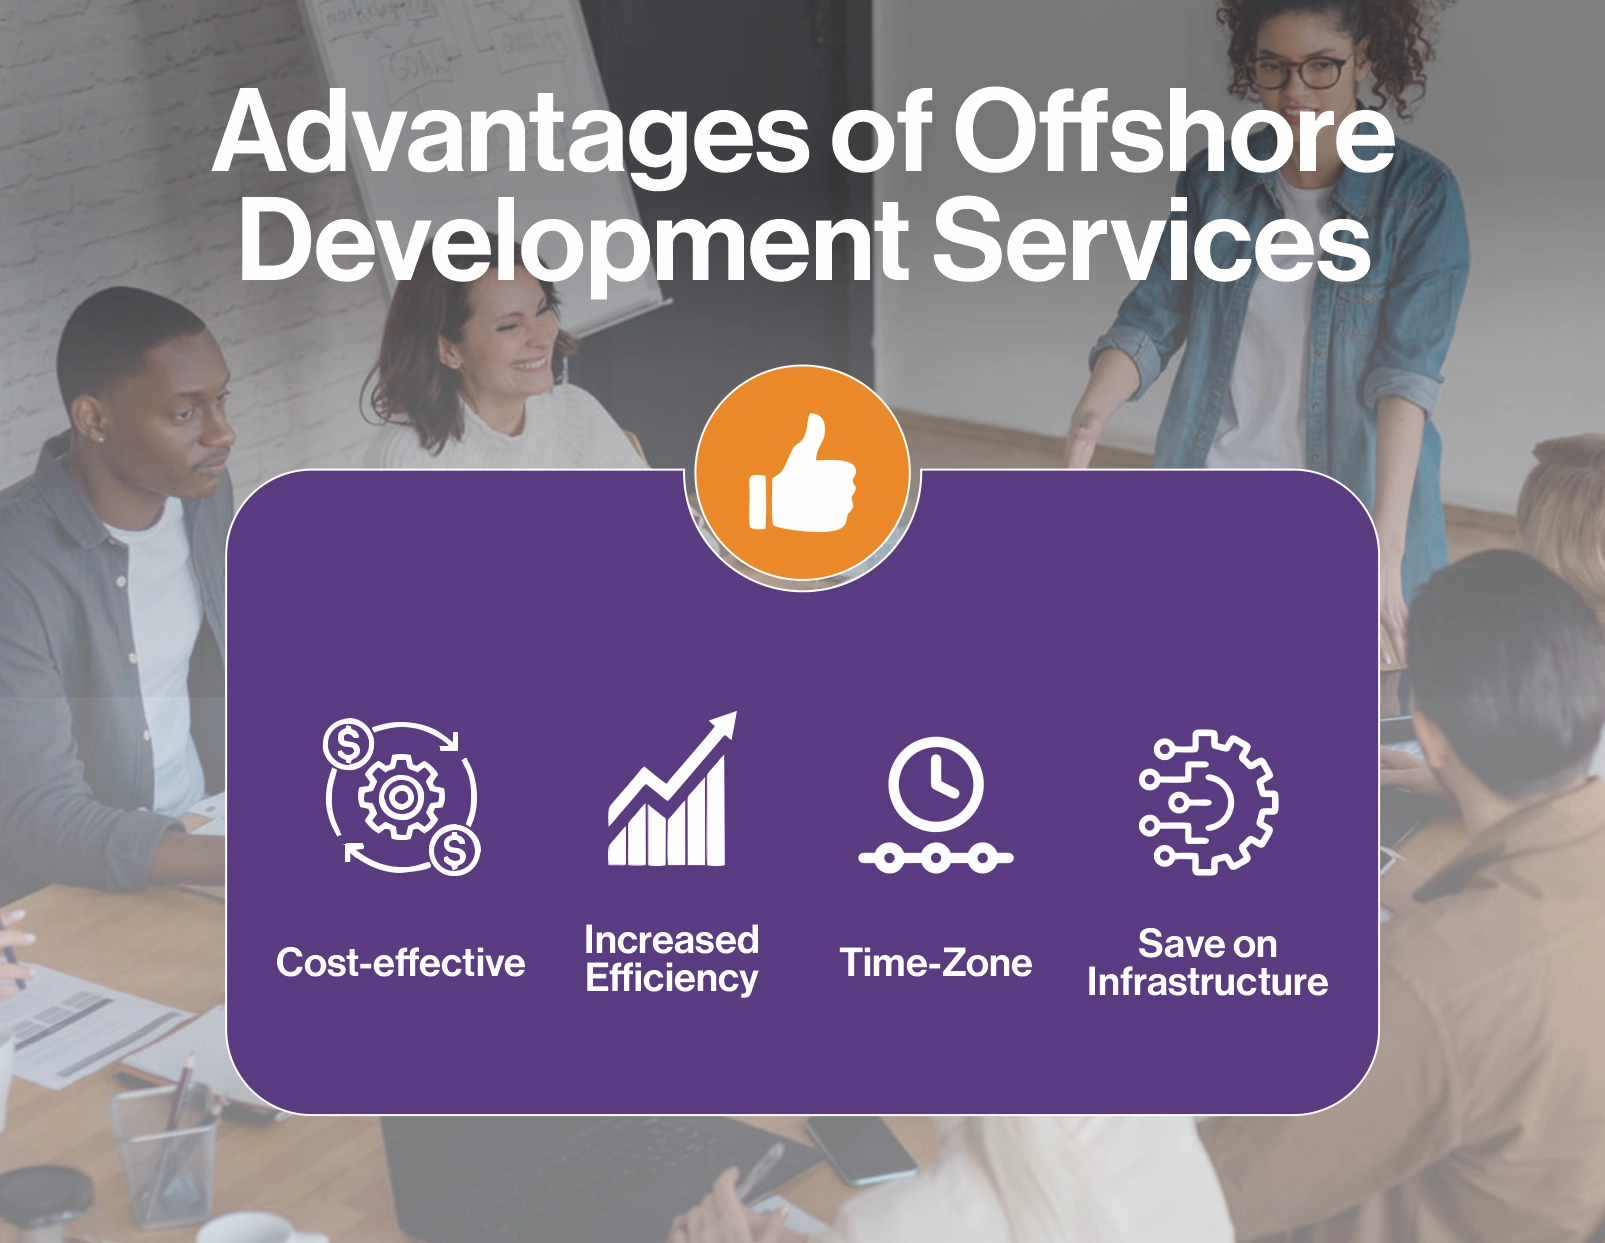 Best Countries for Outsourcing Offshore Software Development